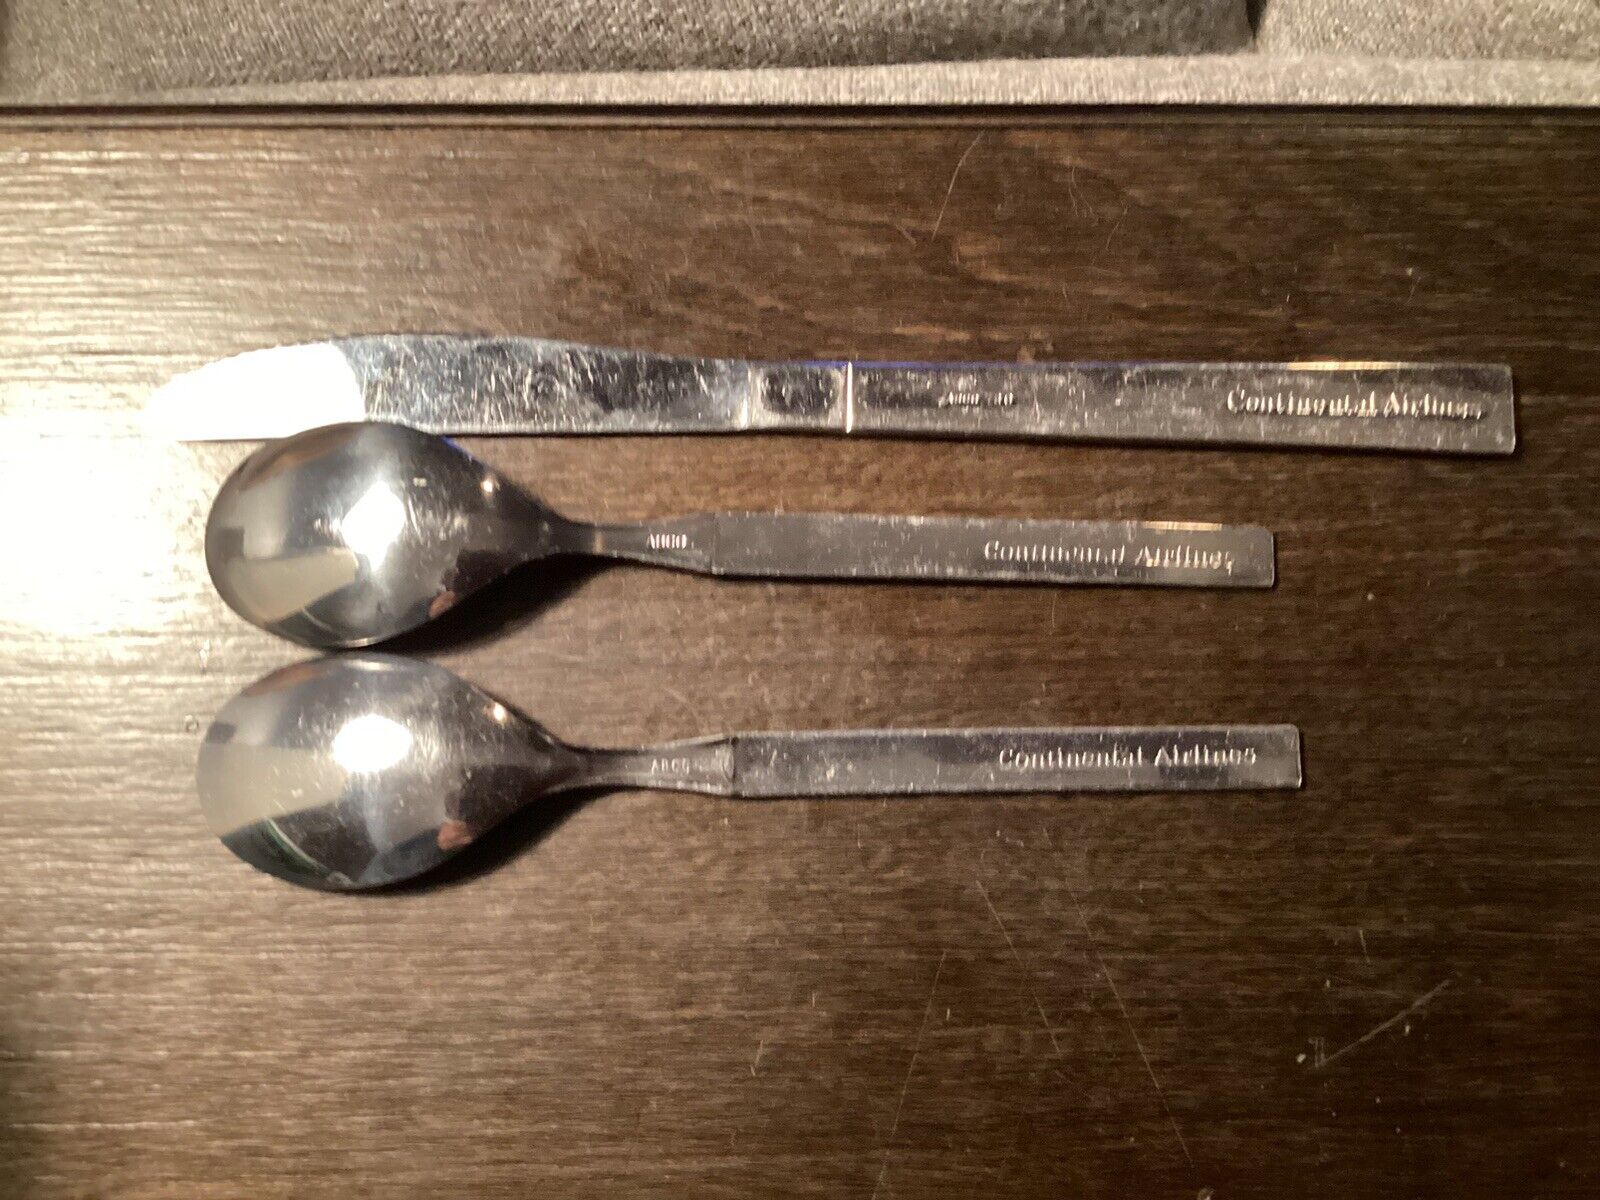 3 Vintage Continental Airlines Airplane Dinner Silverware Cutlery Stainless